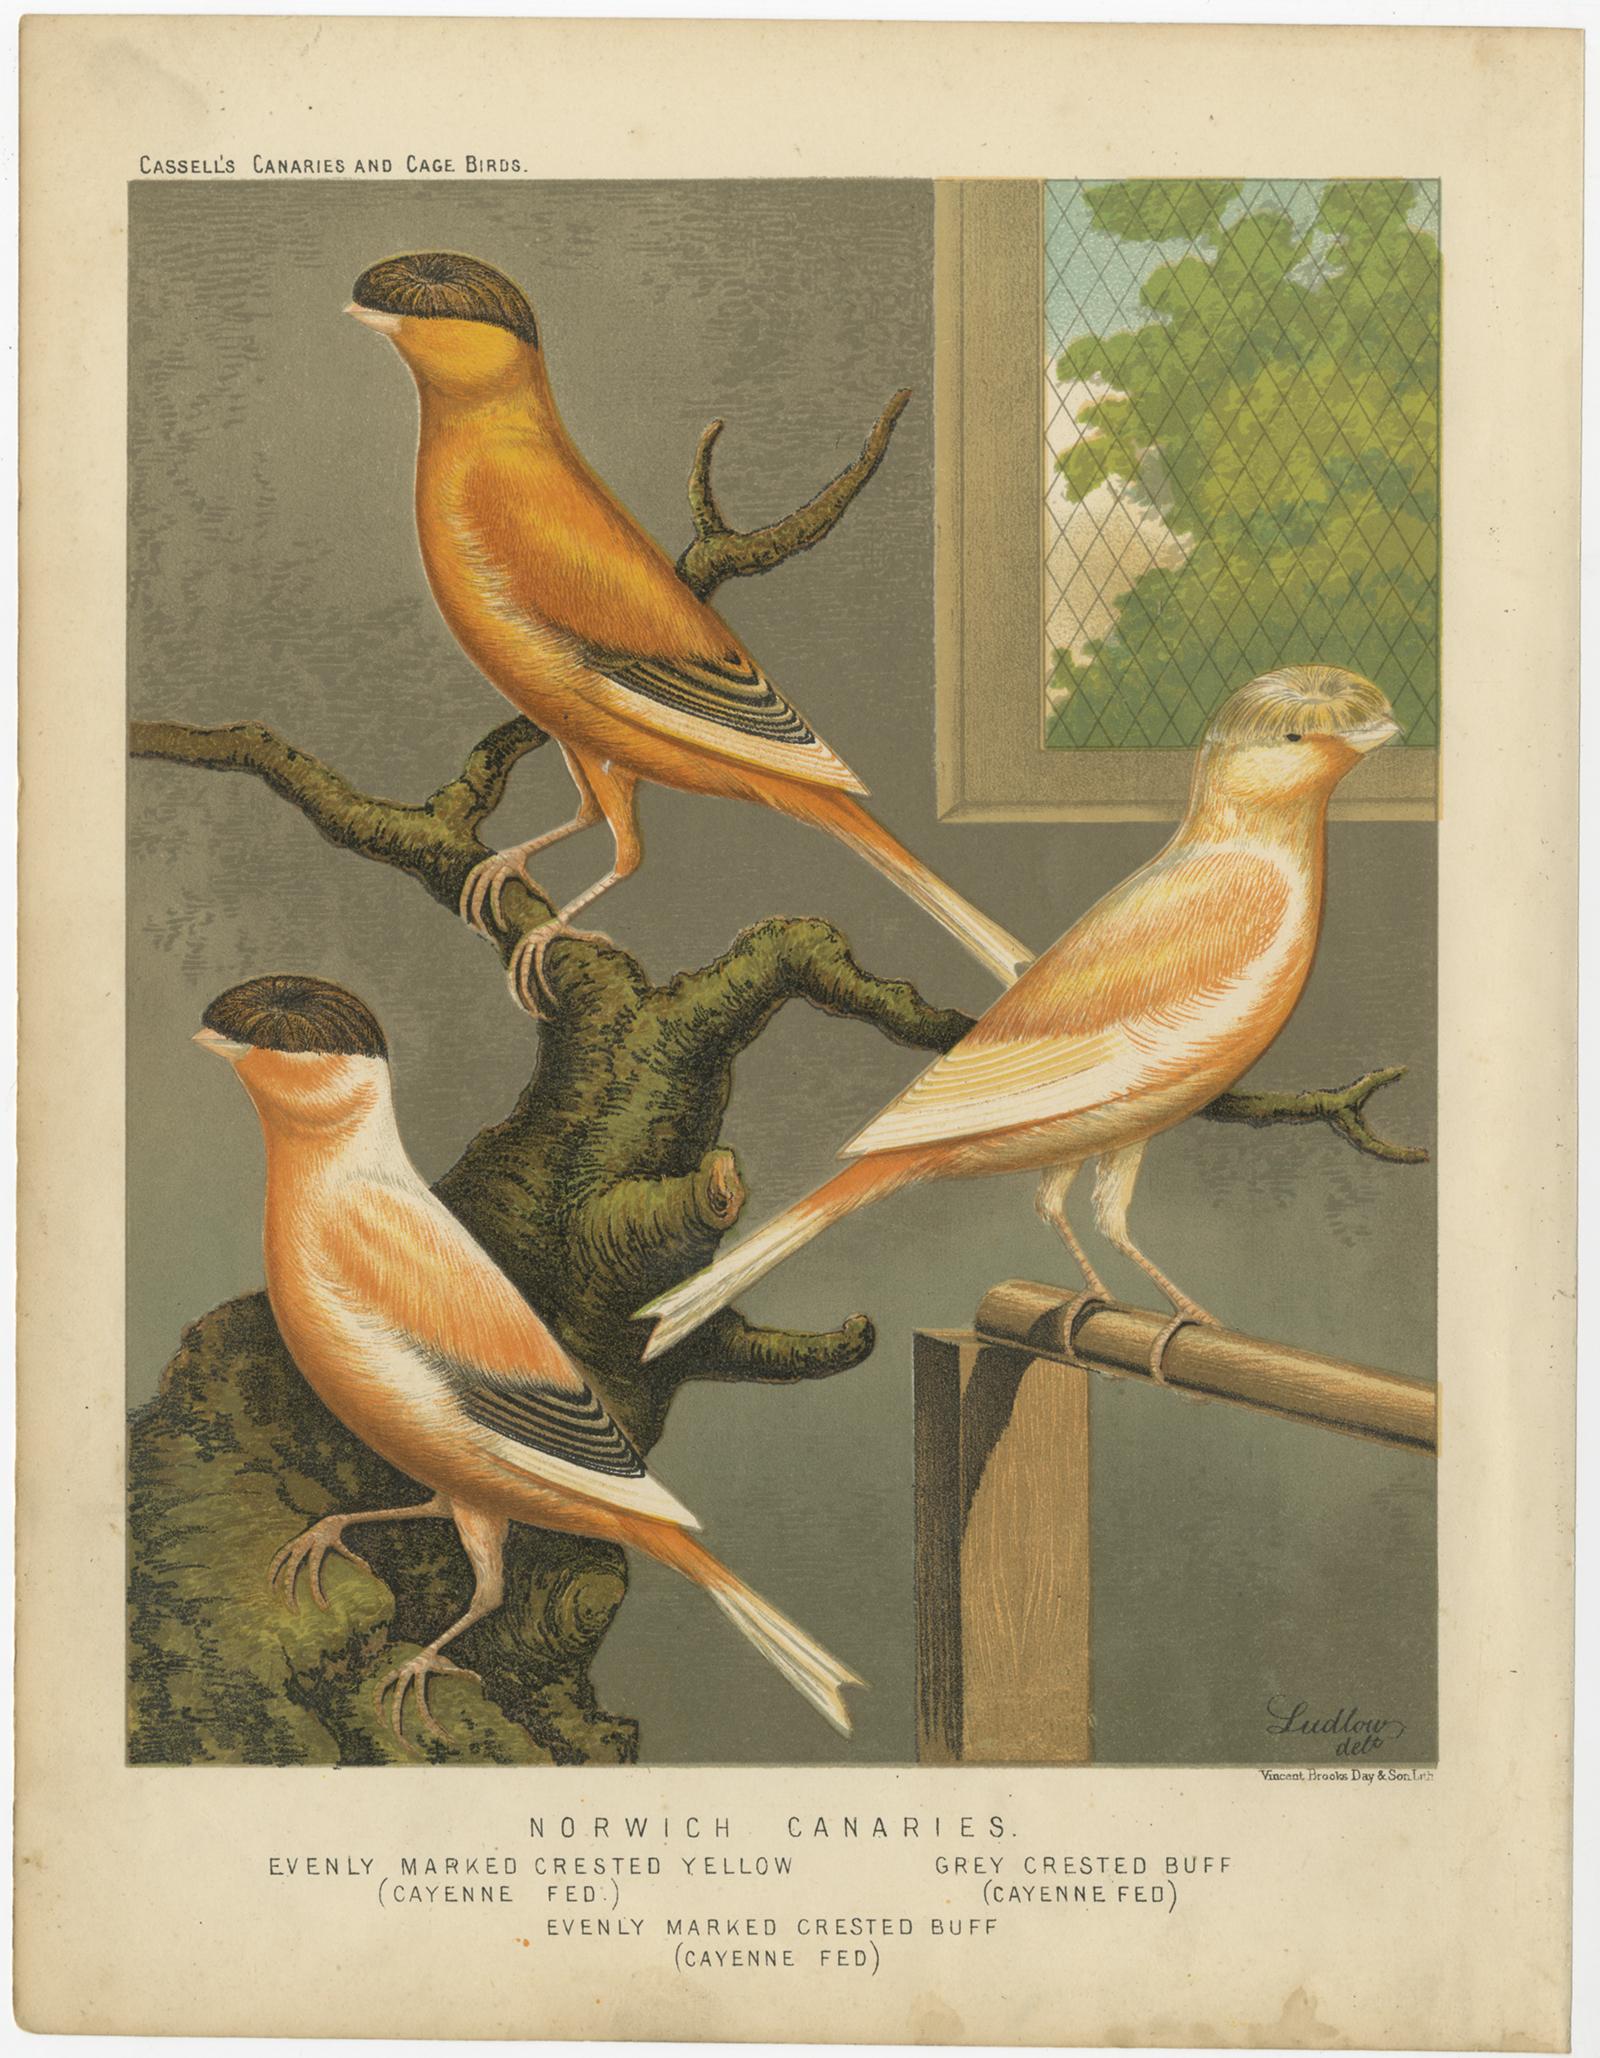 Antique bird print titled 'Norwich Canaries 1. Evenly Marked Crested Yellow (Cayenne Fed) 2. Grey Crested Buff (Cayenne Fed) 3. Evenly Marked Crested Buff (Cayenne Fed)' Old bird print depicting the Norwich Canaries: Evenly Marked Crested Yellow,